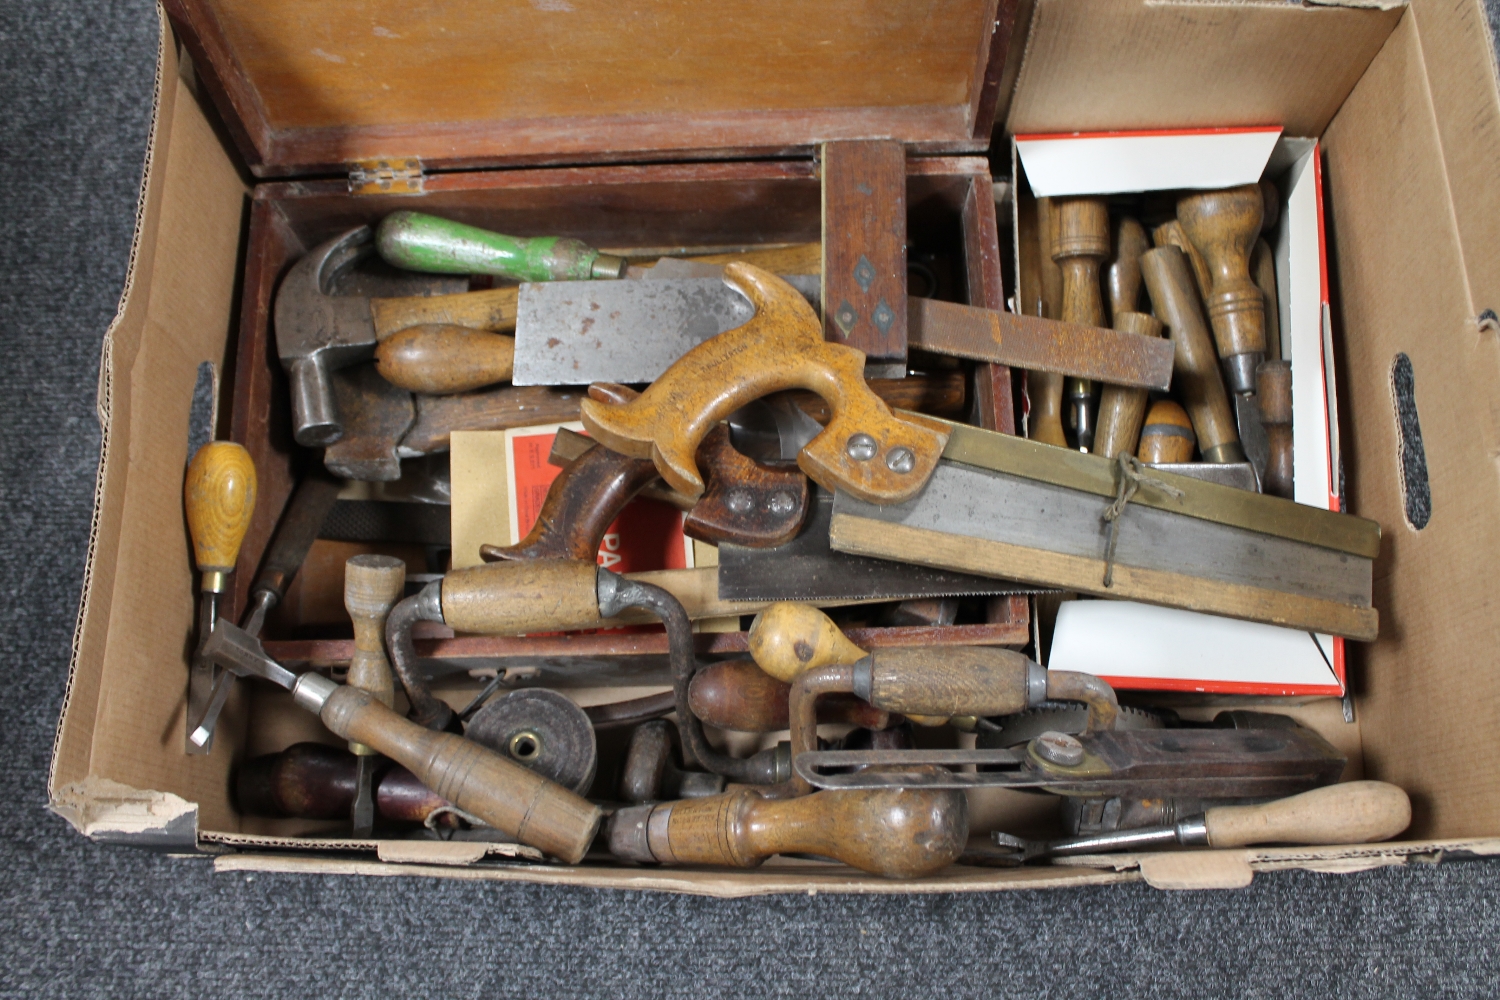 A box of joiner's tools, hand saws, braces,